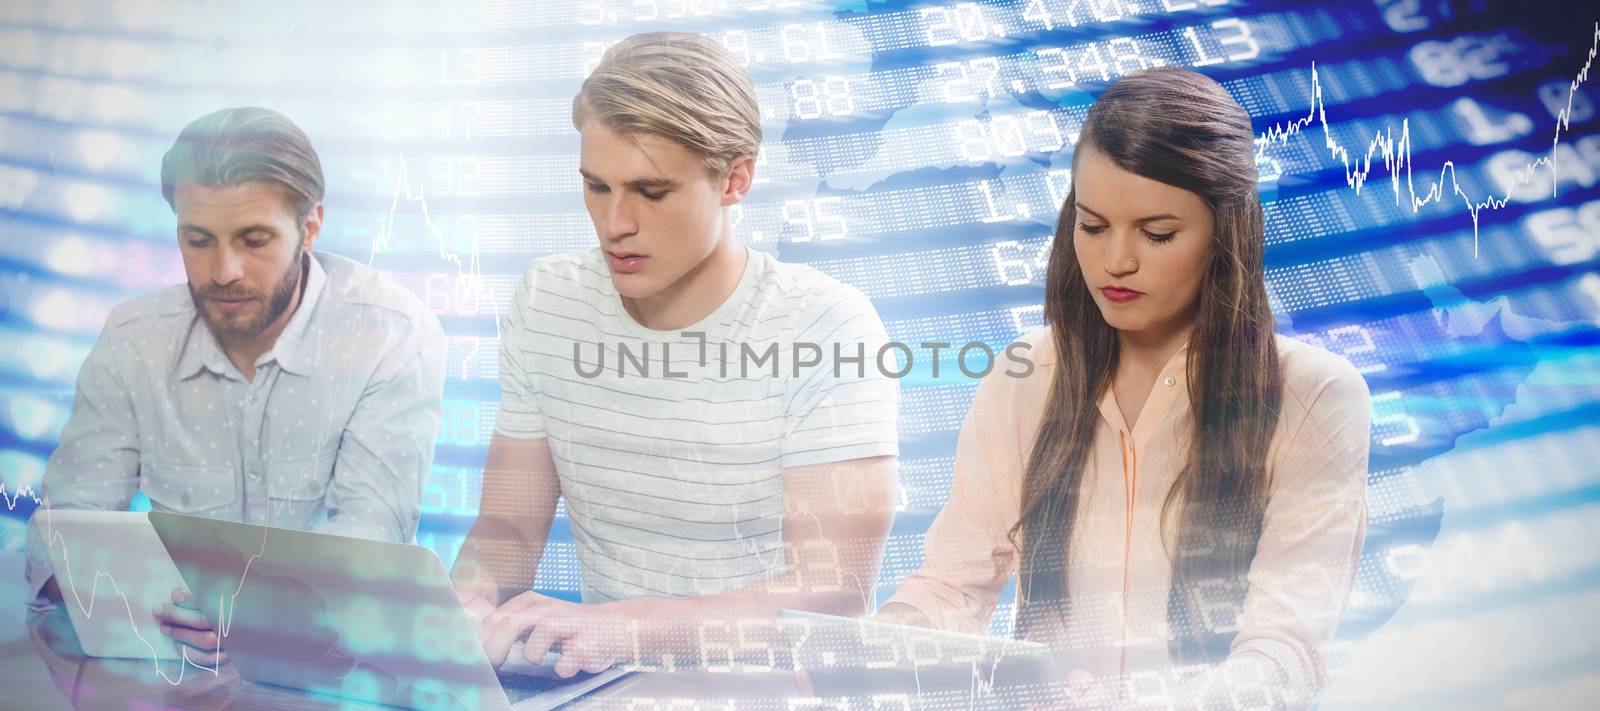 Focused business people using technology against white background against stocks and shares